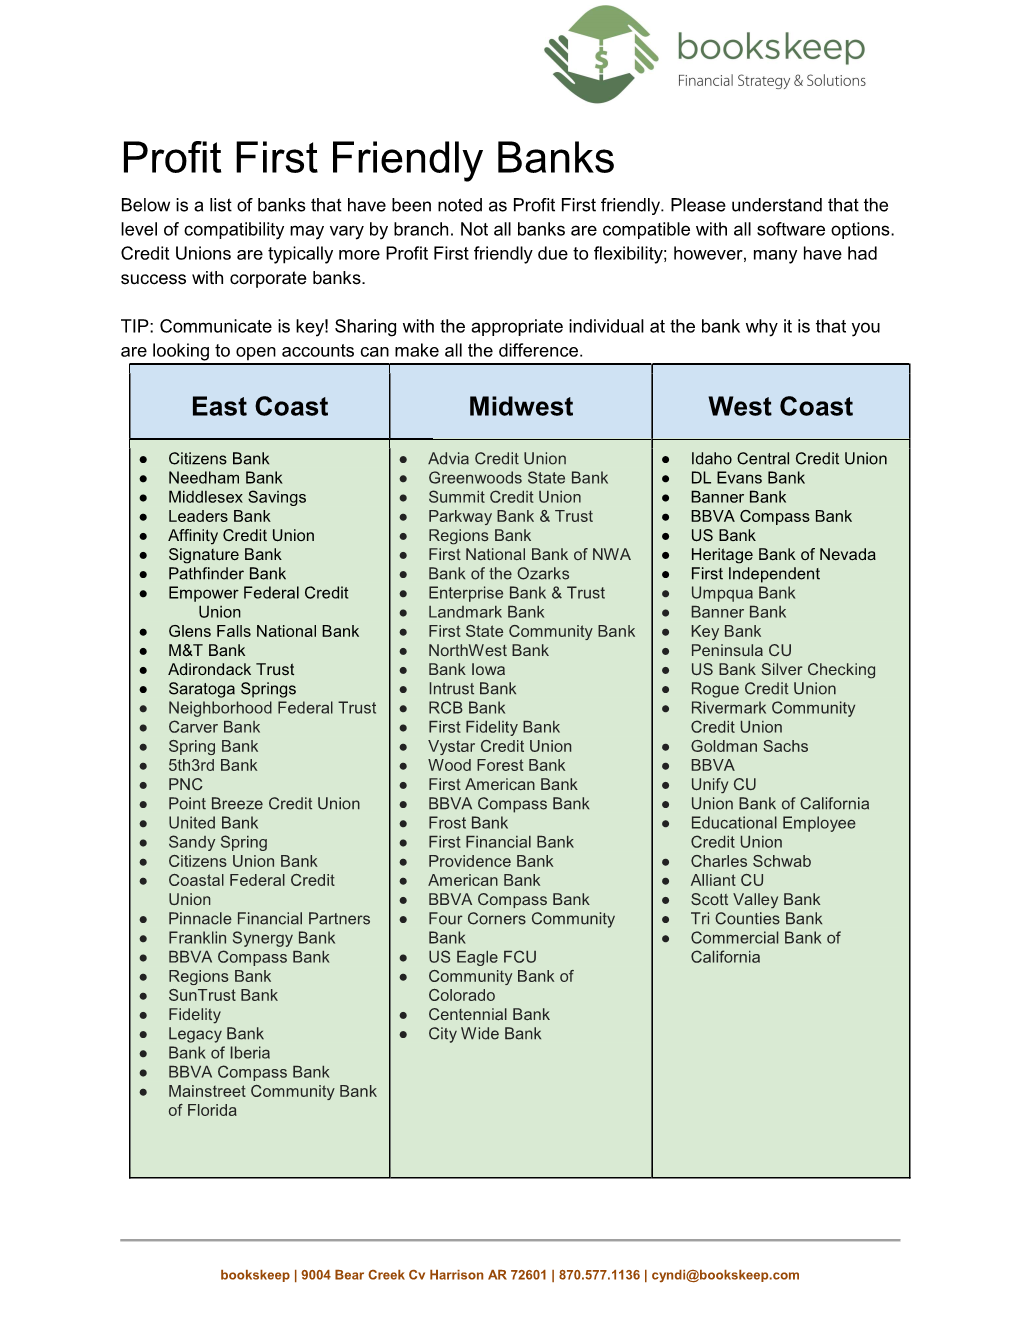 Profit First Friendly Banks Below Is a List of Banks That Have Been Noted As Profit First Friendly